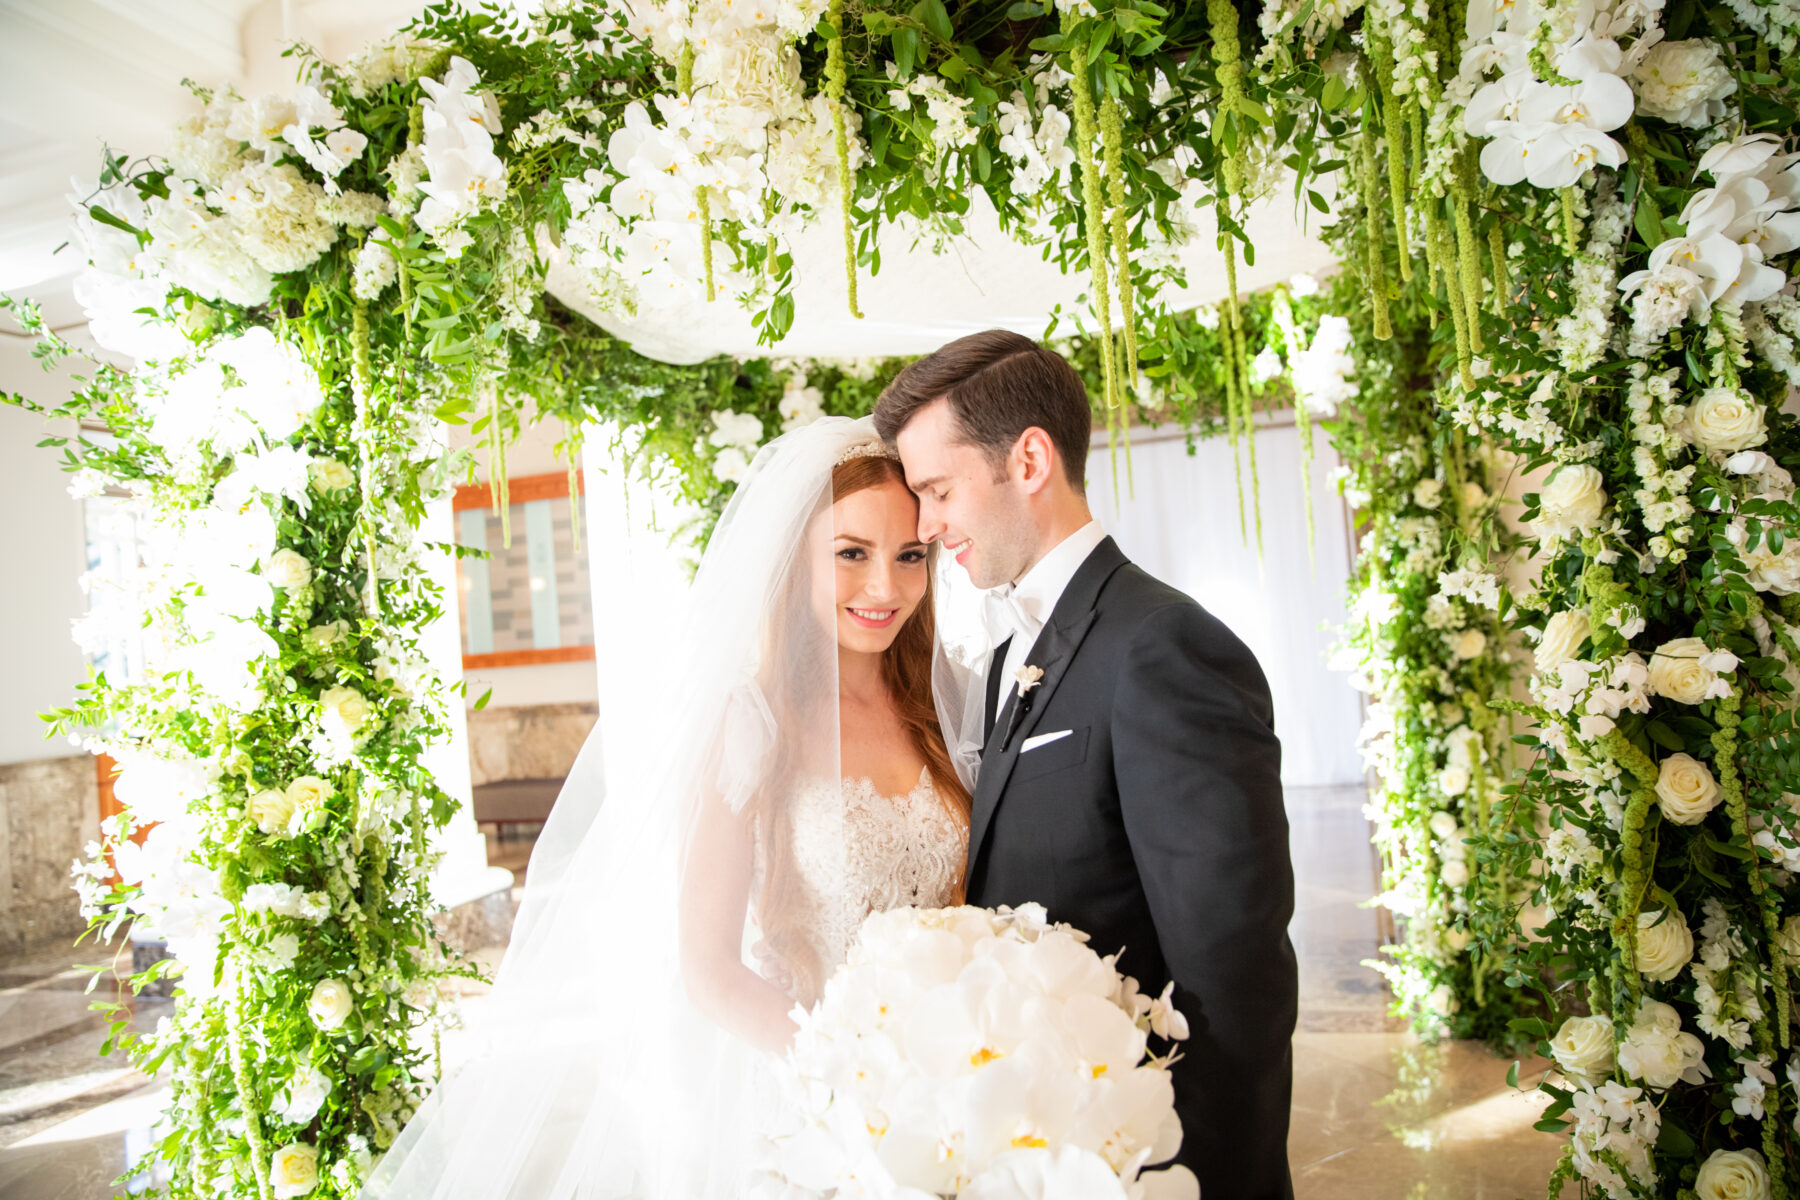 Matt Andrews Photography: Floral Filled Luxurious Wedding by LMA Designs featured on Nashville Bride Guide